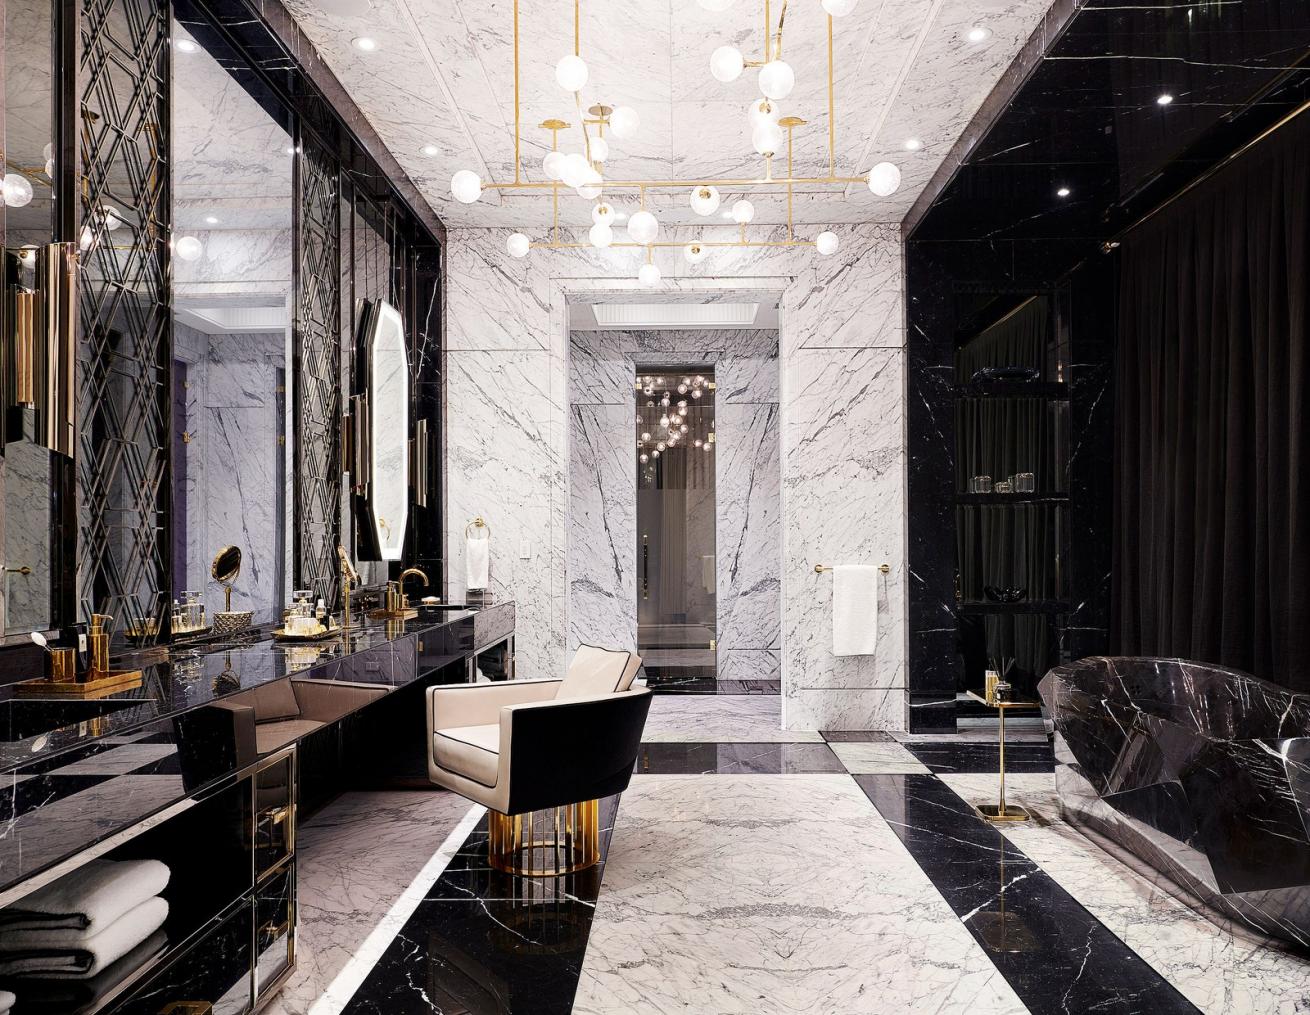 The master bath features a Nero Marquina marble vanity and tub. Custom chandelier by Lumifer; Brabbu sconces; chair by Rafauli